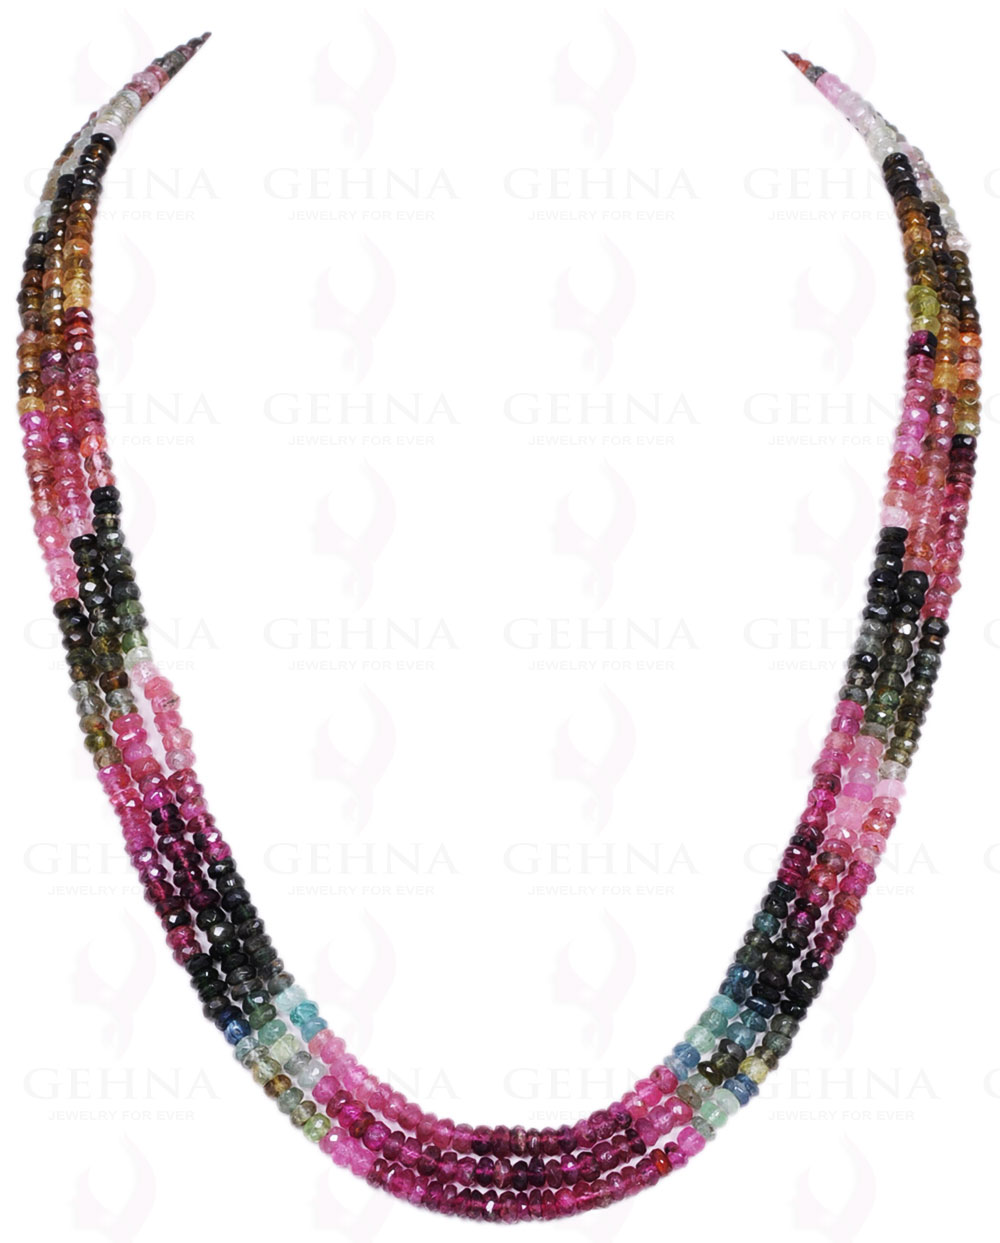 3 Rows of Multi Tourmaline Gemstone Faceted Bead Necklace NS-1179